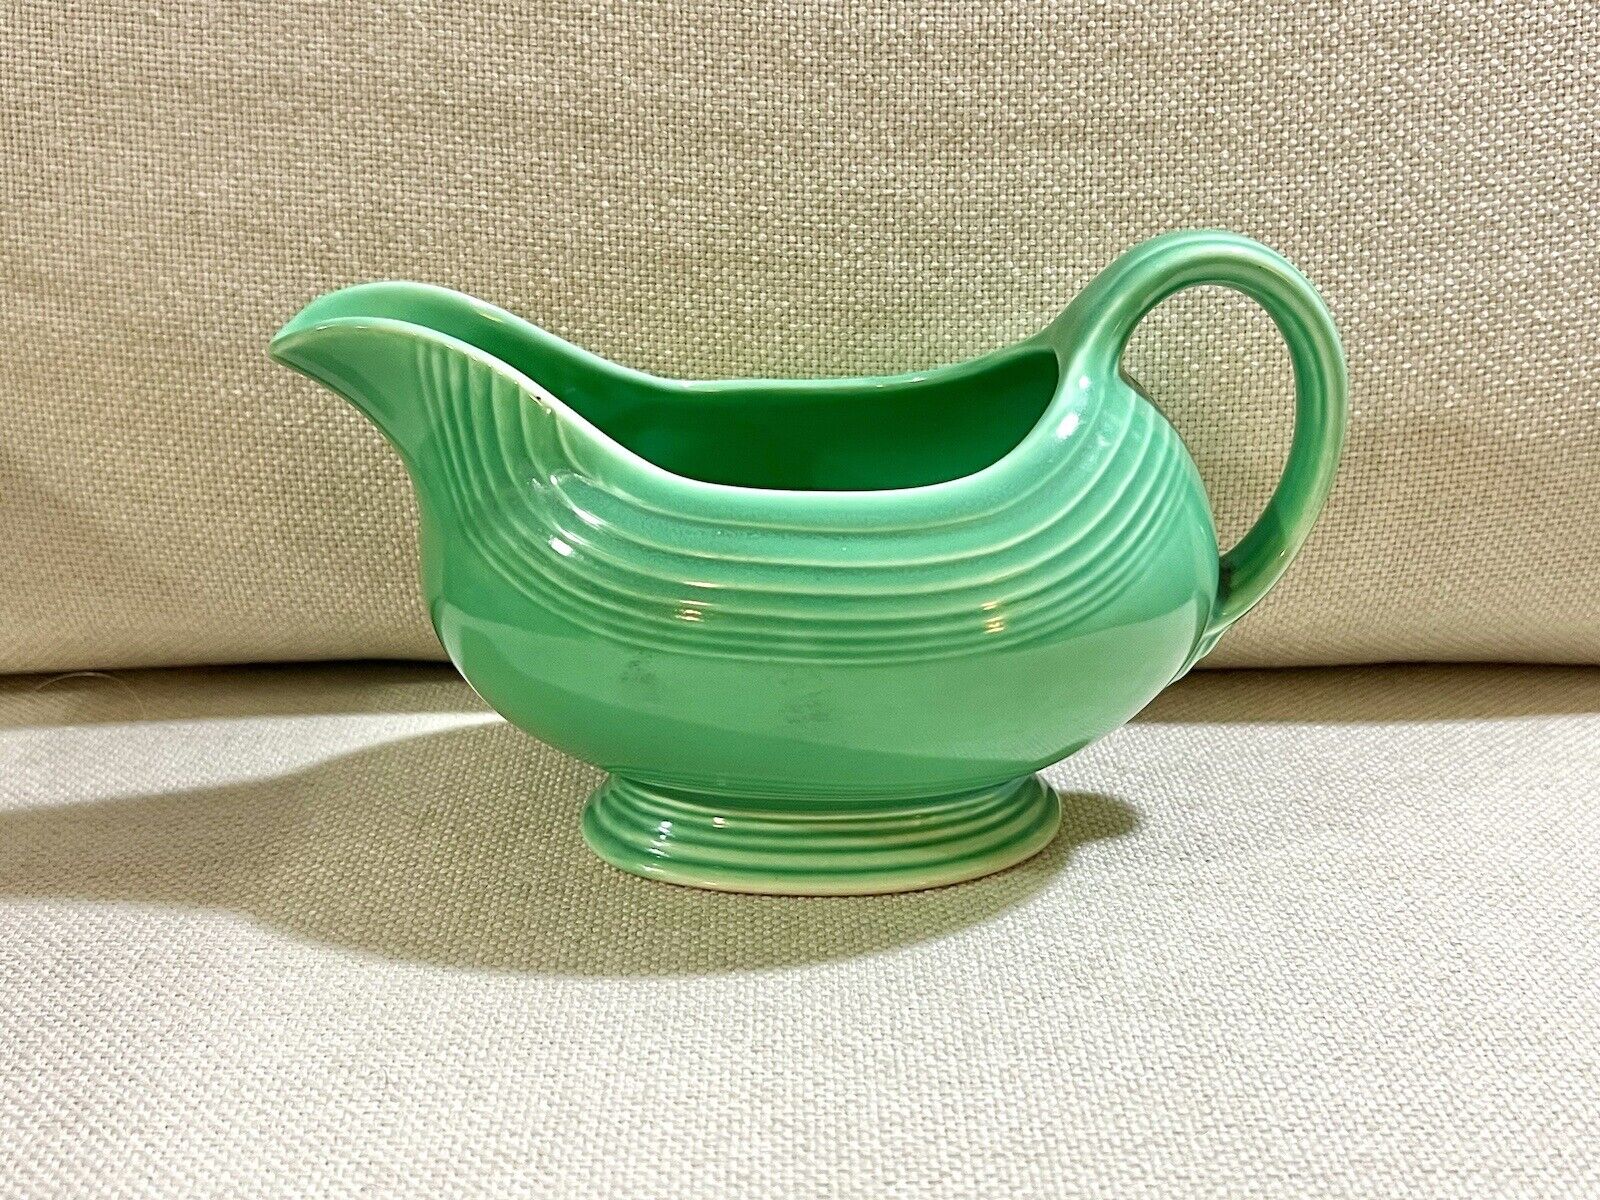 AUTHENTIC Vintage “fiesta HLC USA” GREEN SAUCE Gravy BOAT Ca 1936-1951 No Flaws